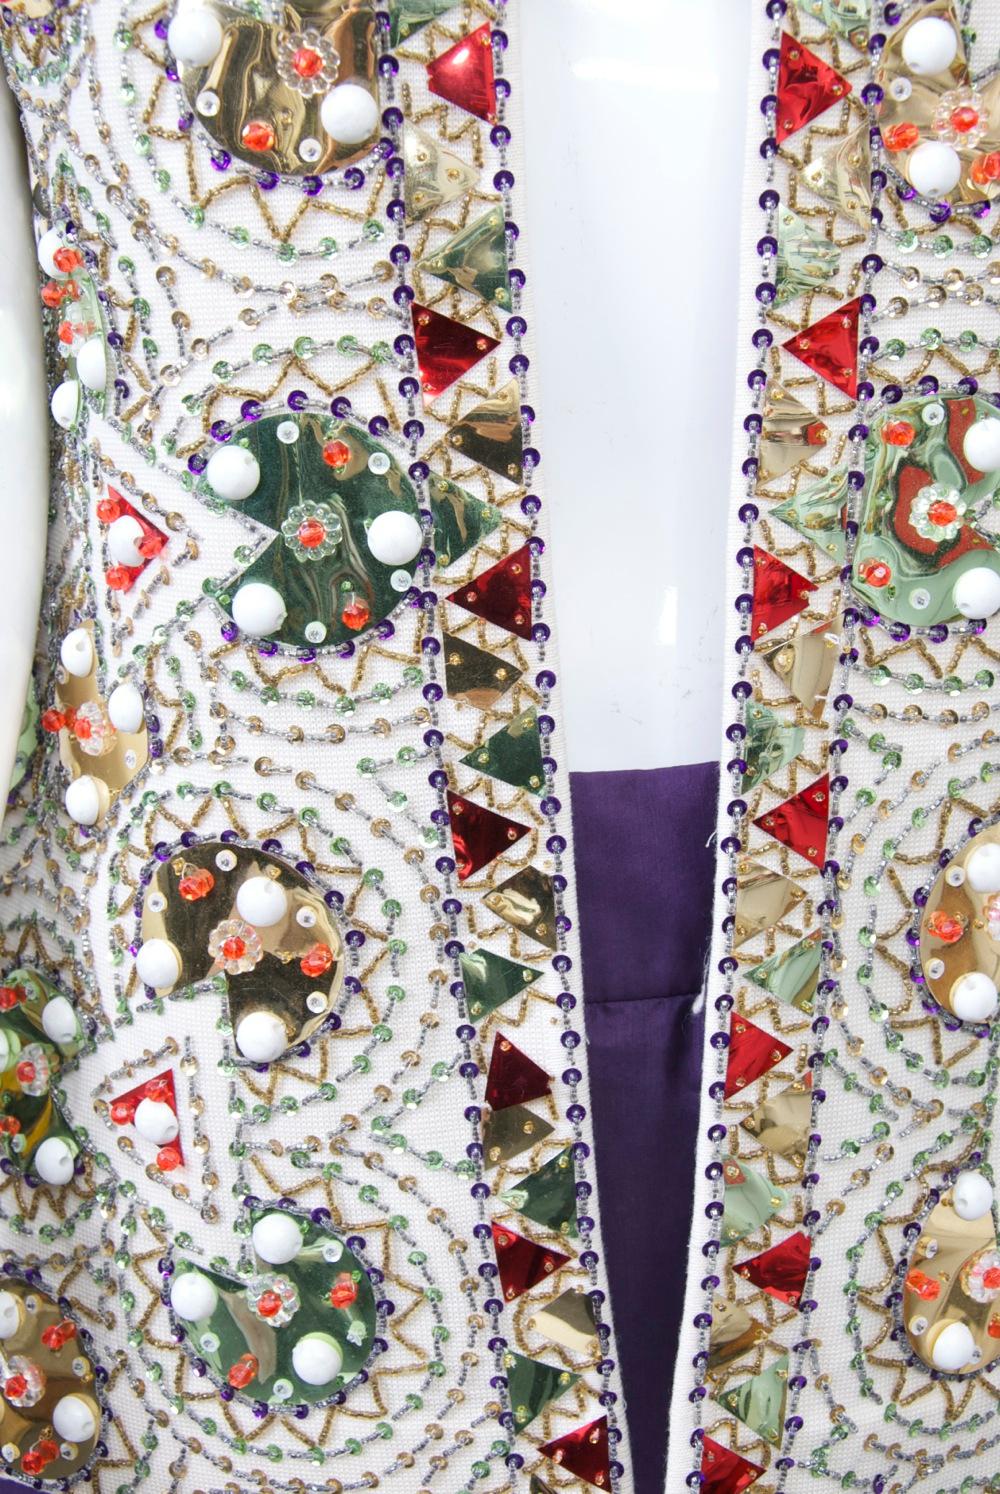 A unique piece from renowned coat and suit manufacturer Lilli Ann, this vest is extravagantly and boldly decorated with large multicolored paillettes in geometric shapes that echo the overall geometric pattern of the piece. The geometric pattern of